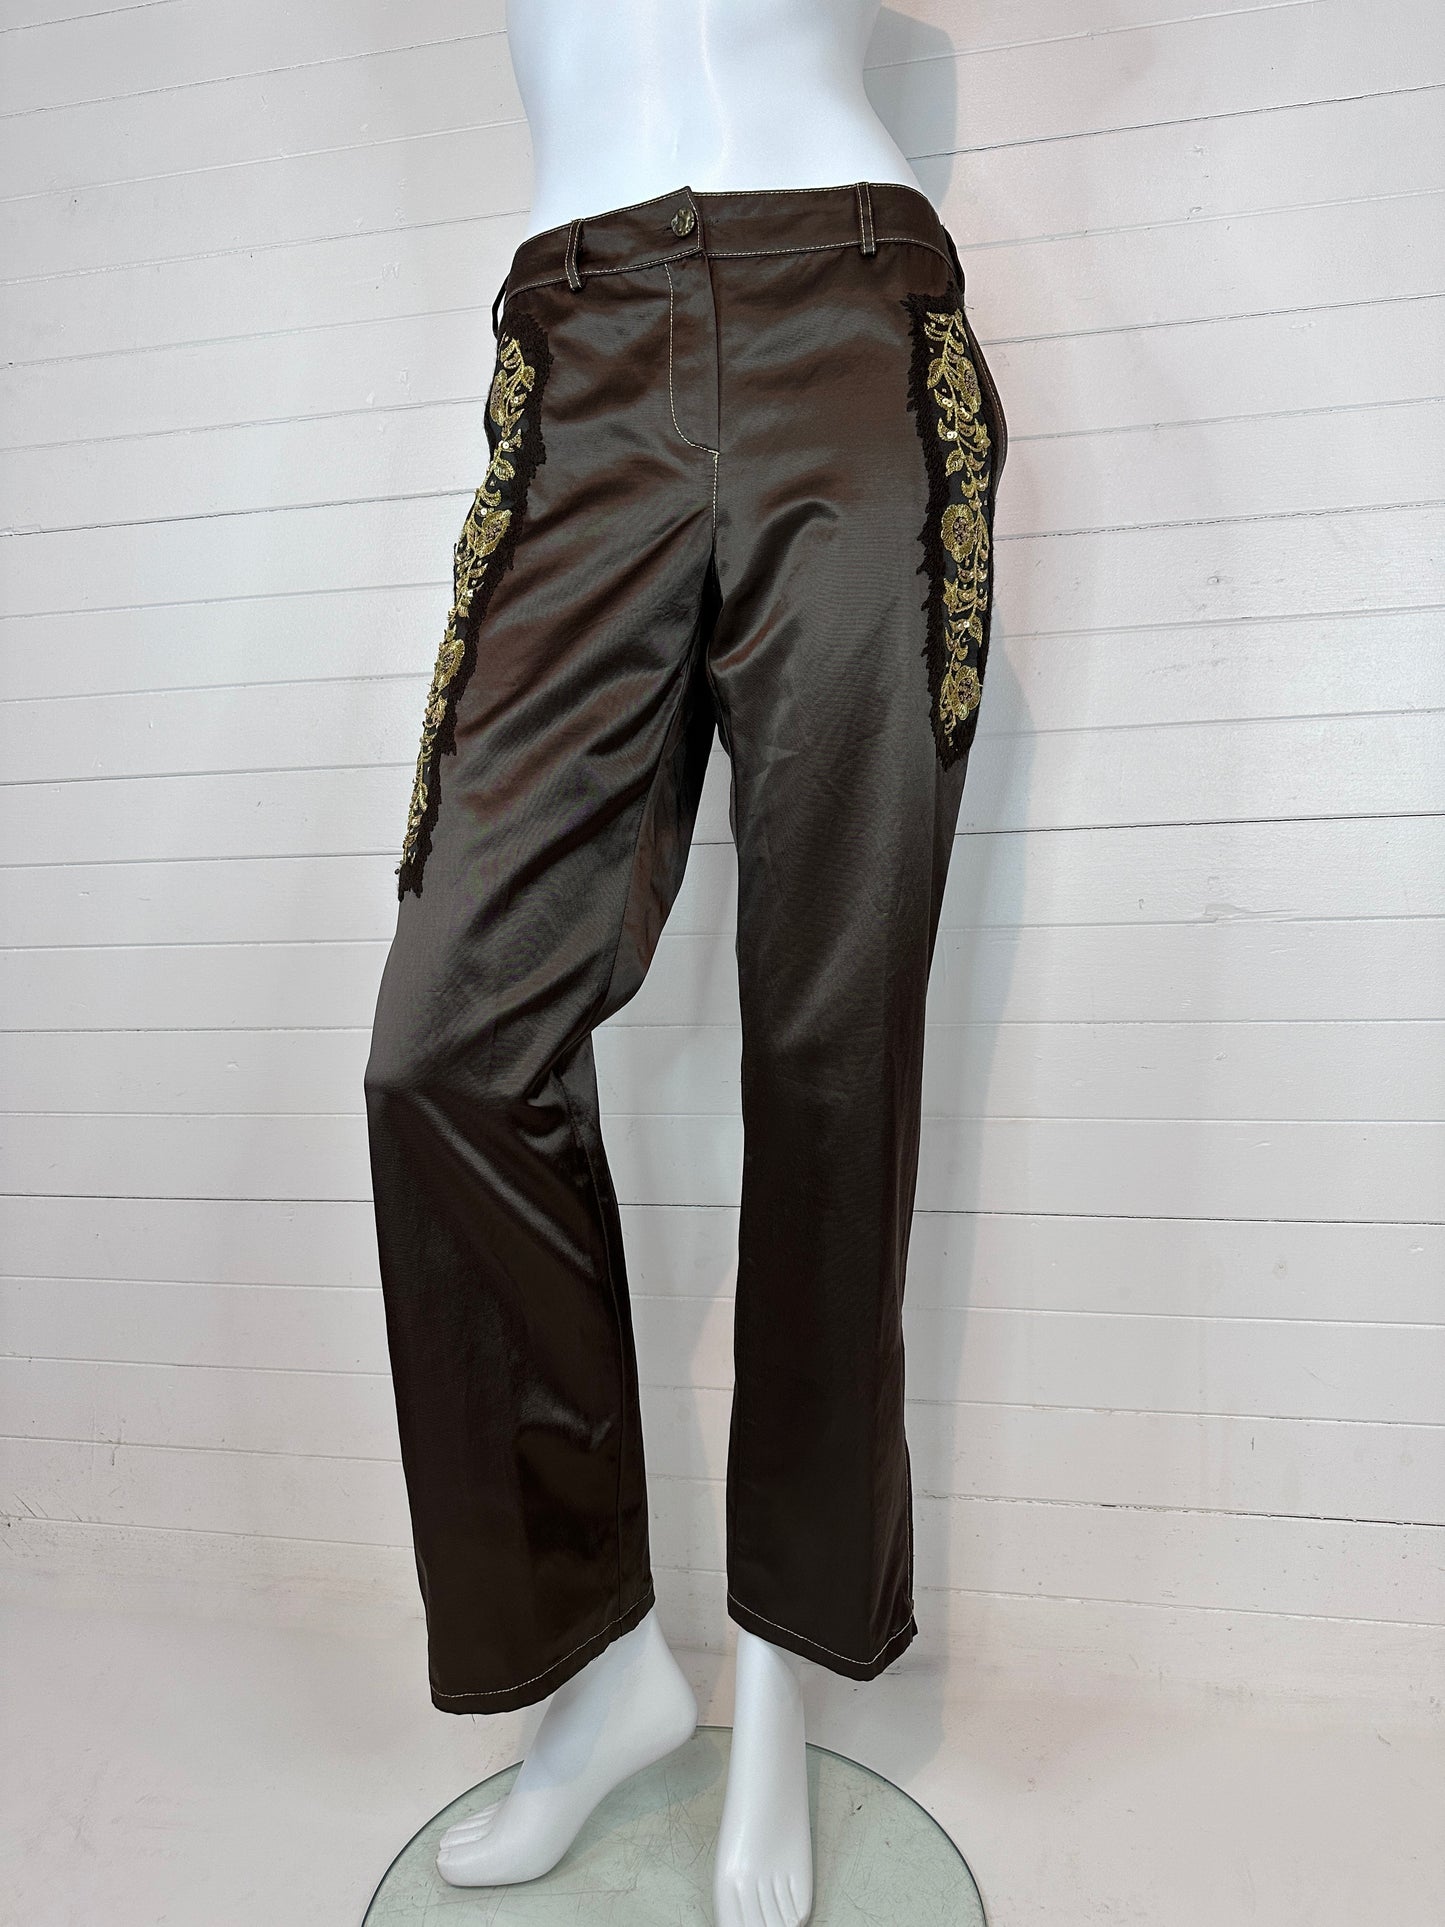 Y2K Roberto Cavalli Class Satin Pants with Gold Embroidery (12)